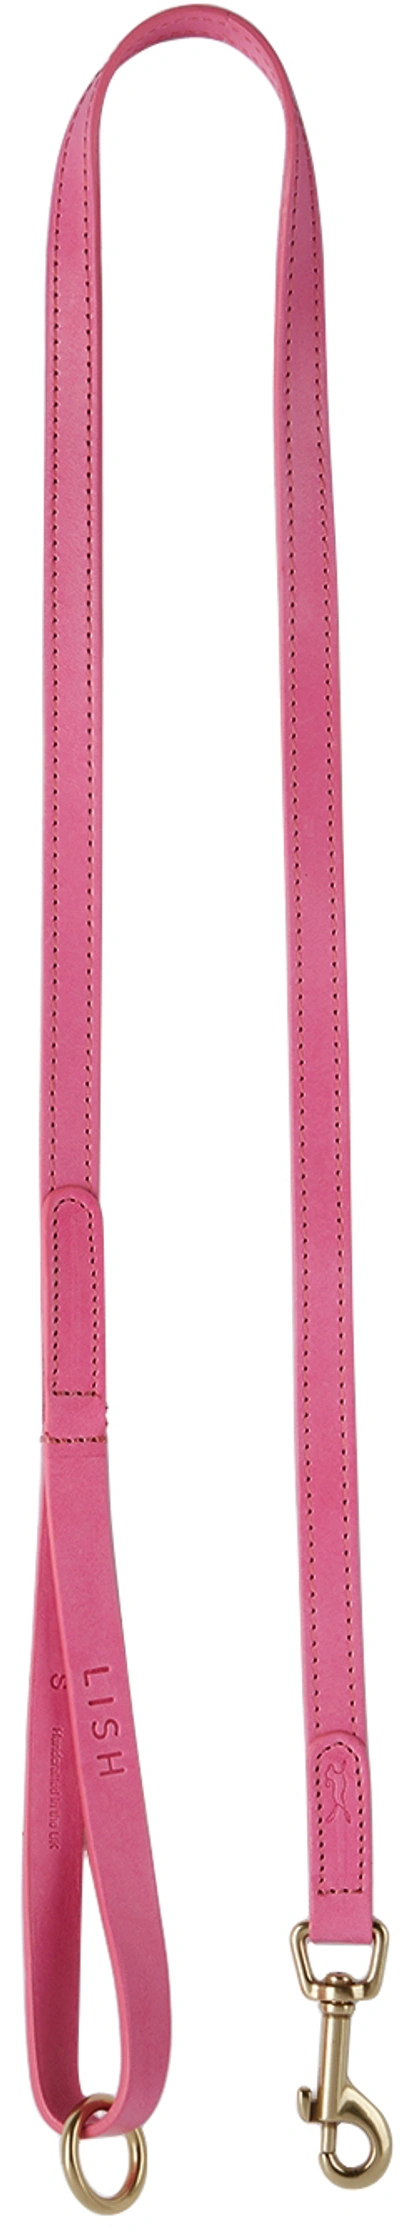 Lish Pink Small Coopers Leash